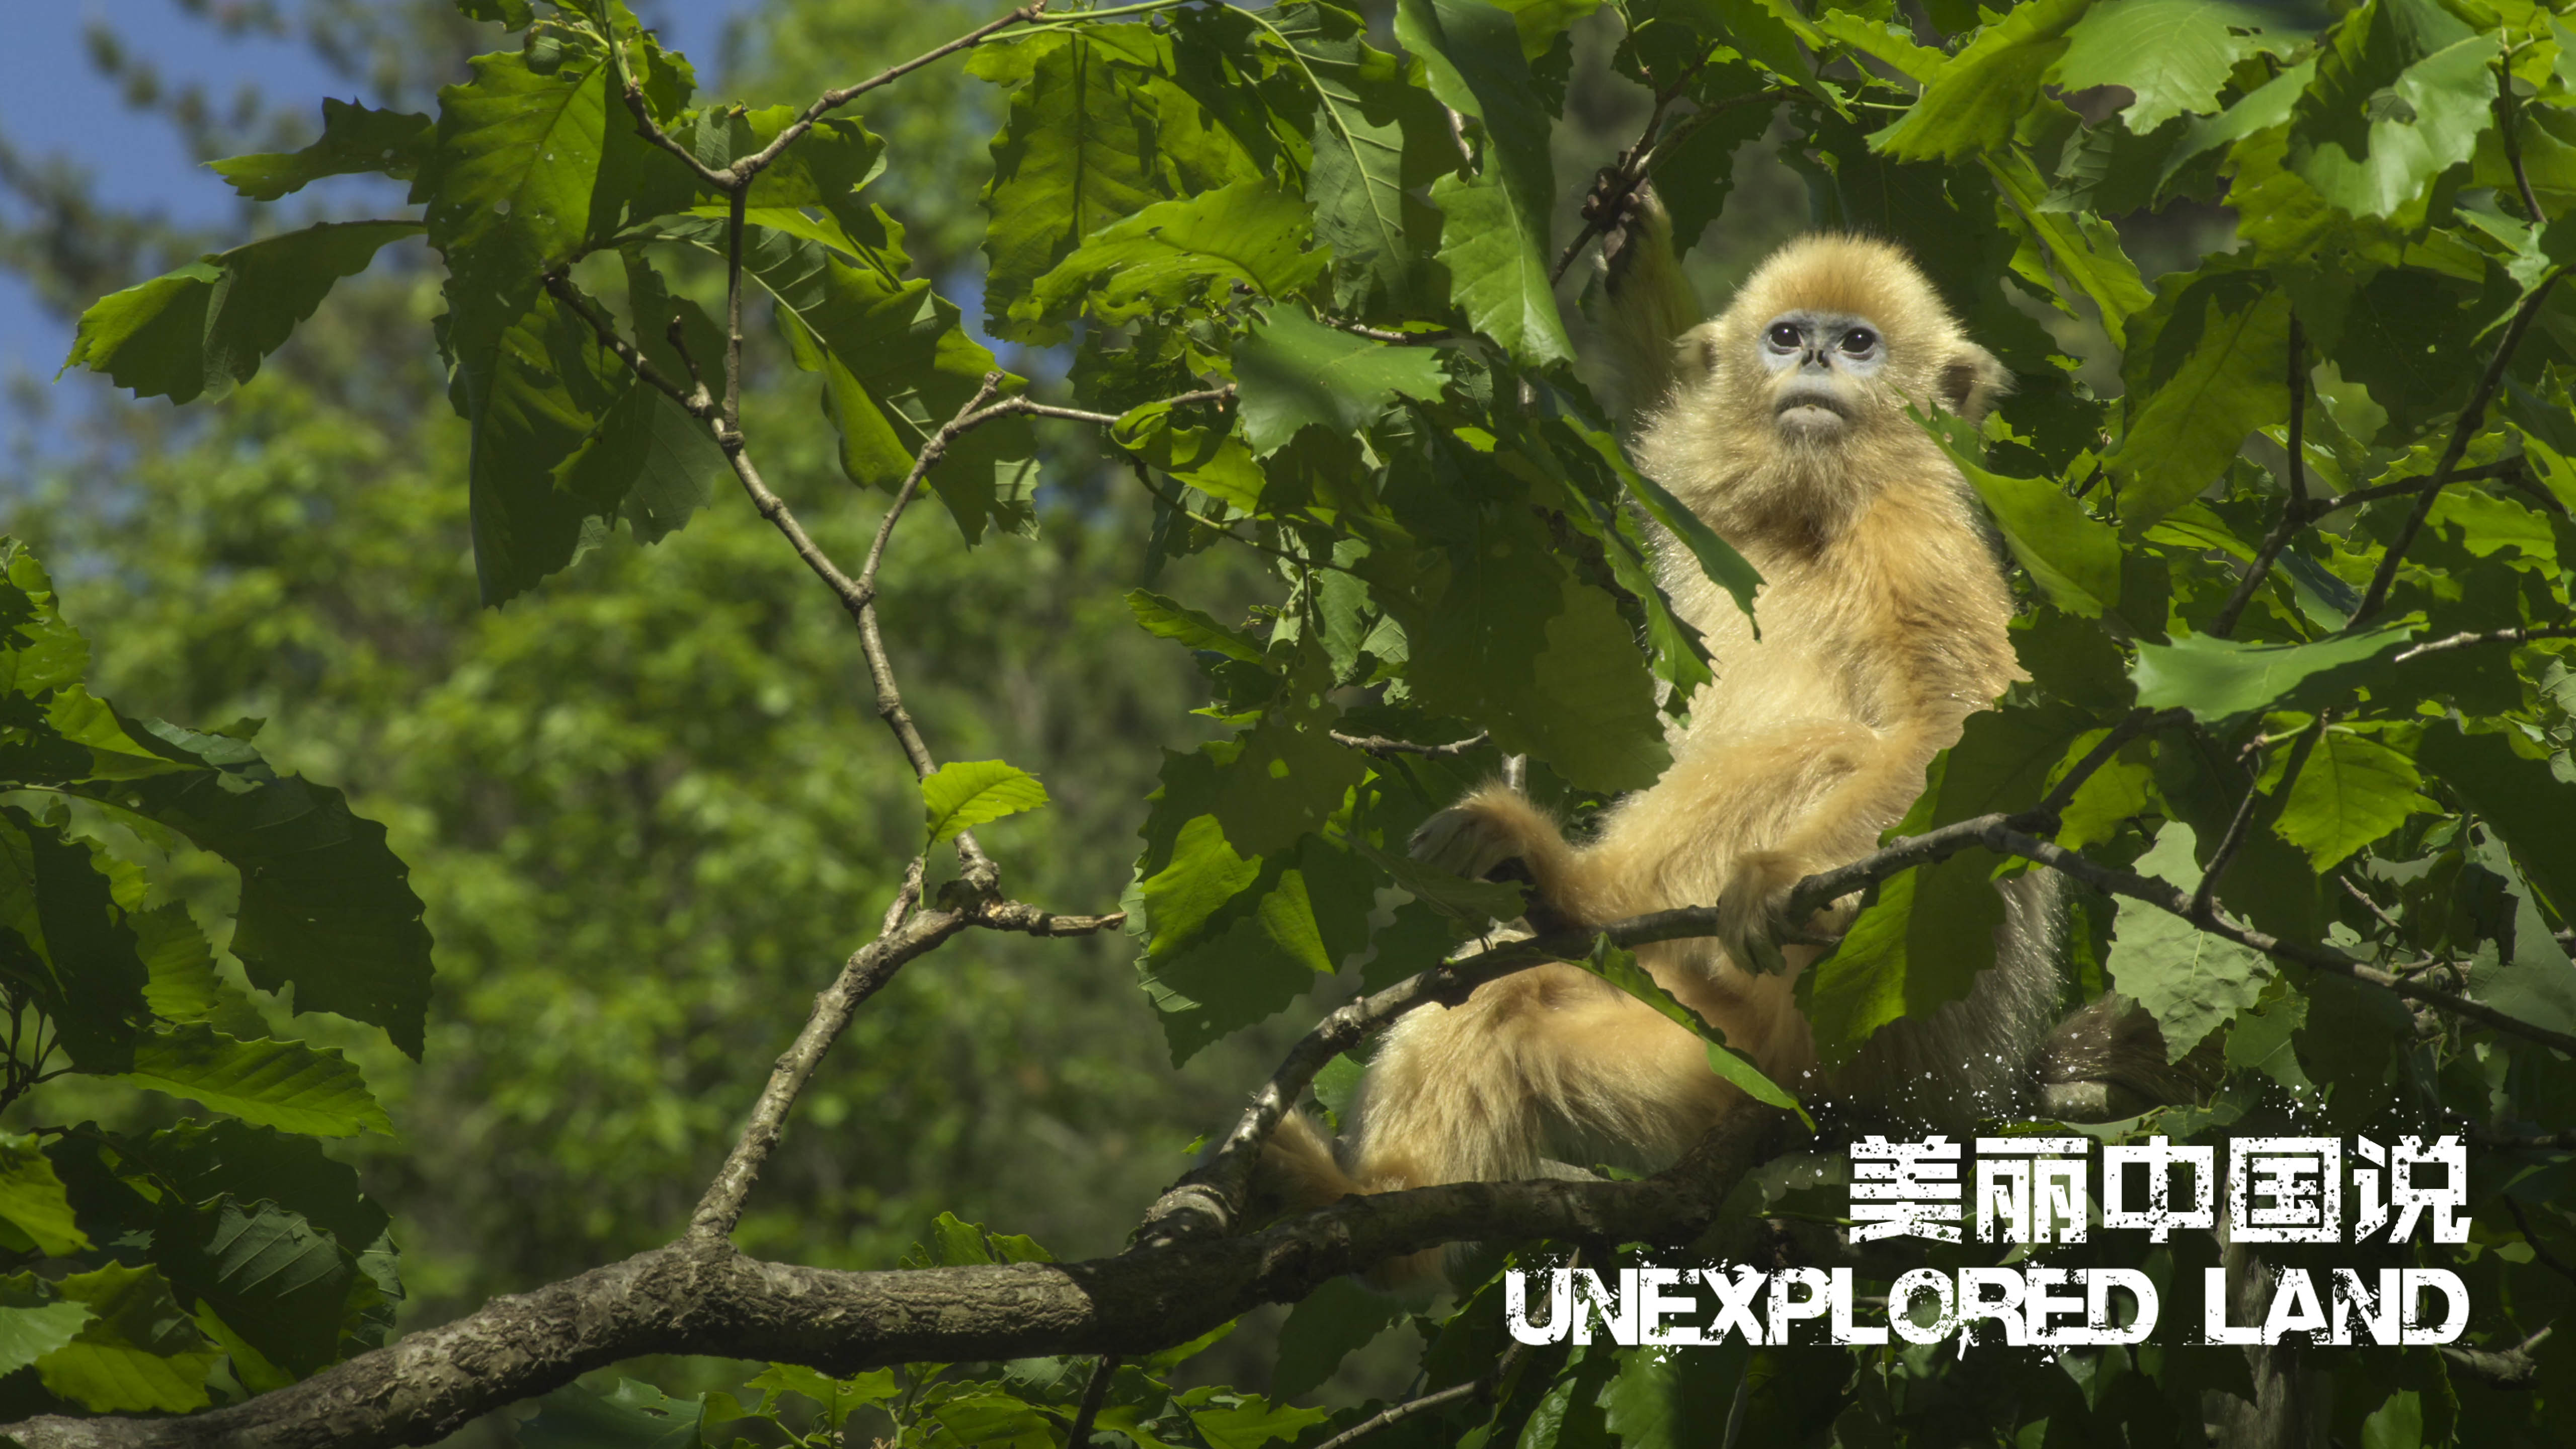 Unexplored Land: Their growing stories in Qinling Mountains